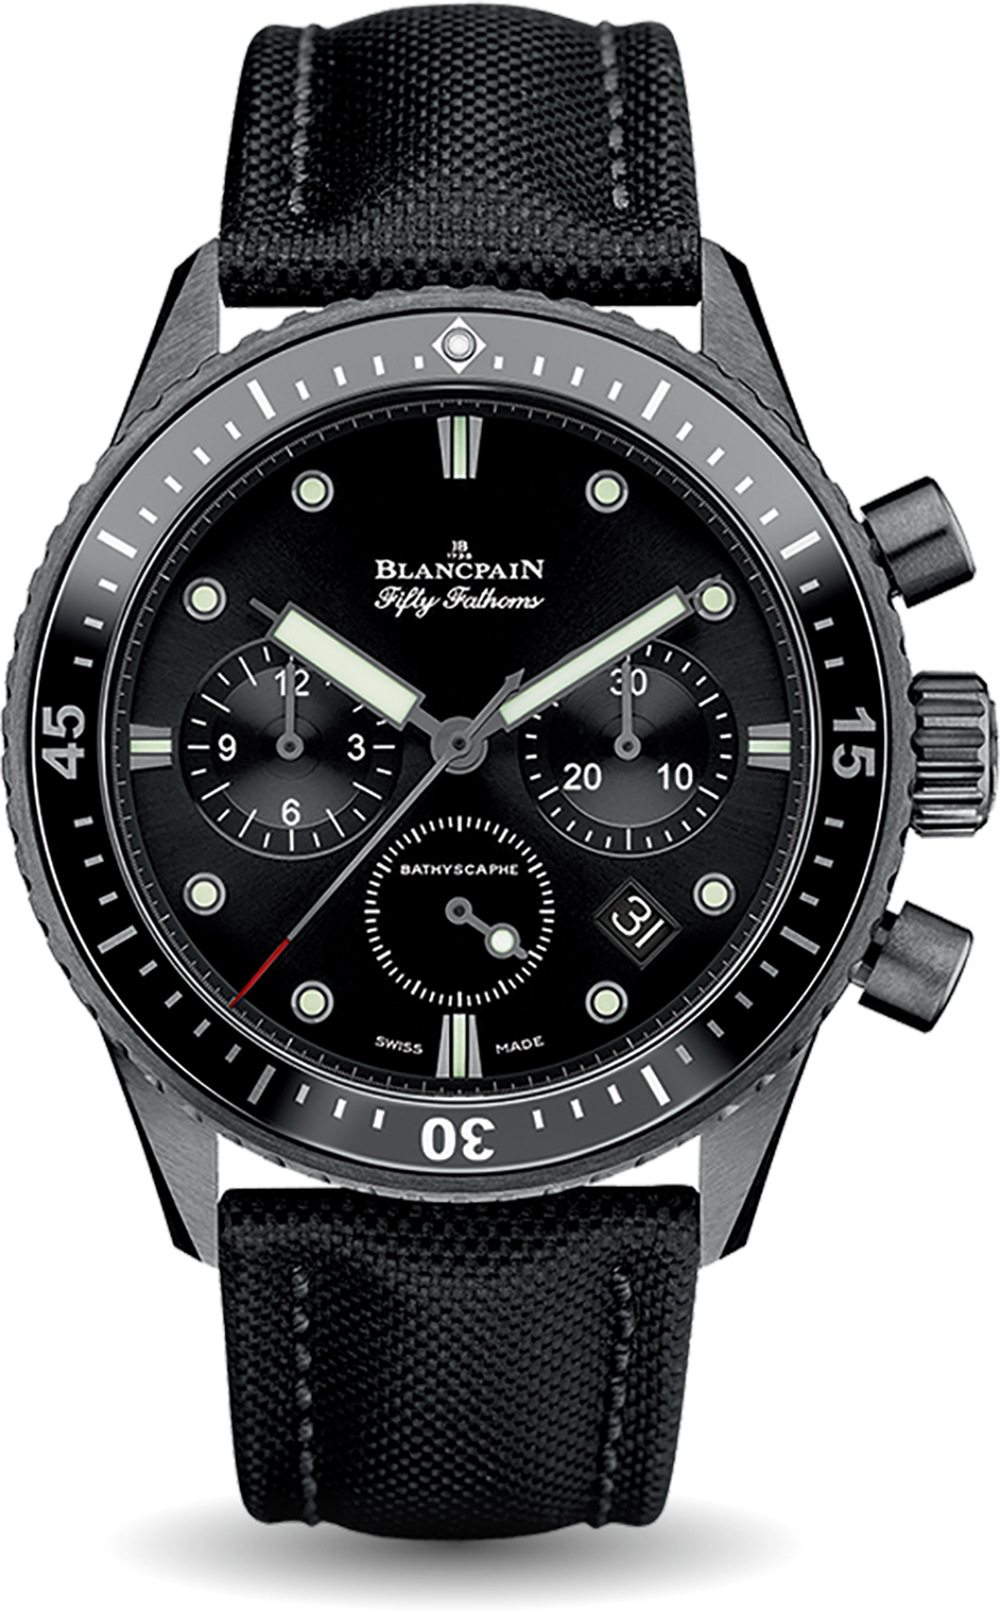 Fifty Fathoms Chronographe Flyback